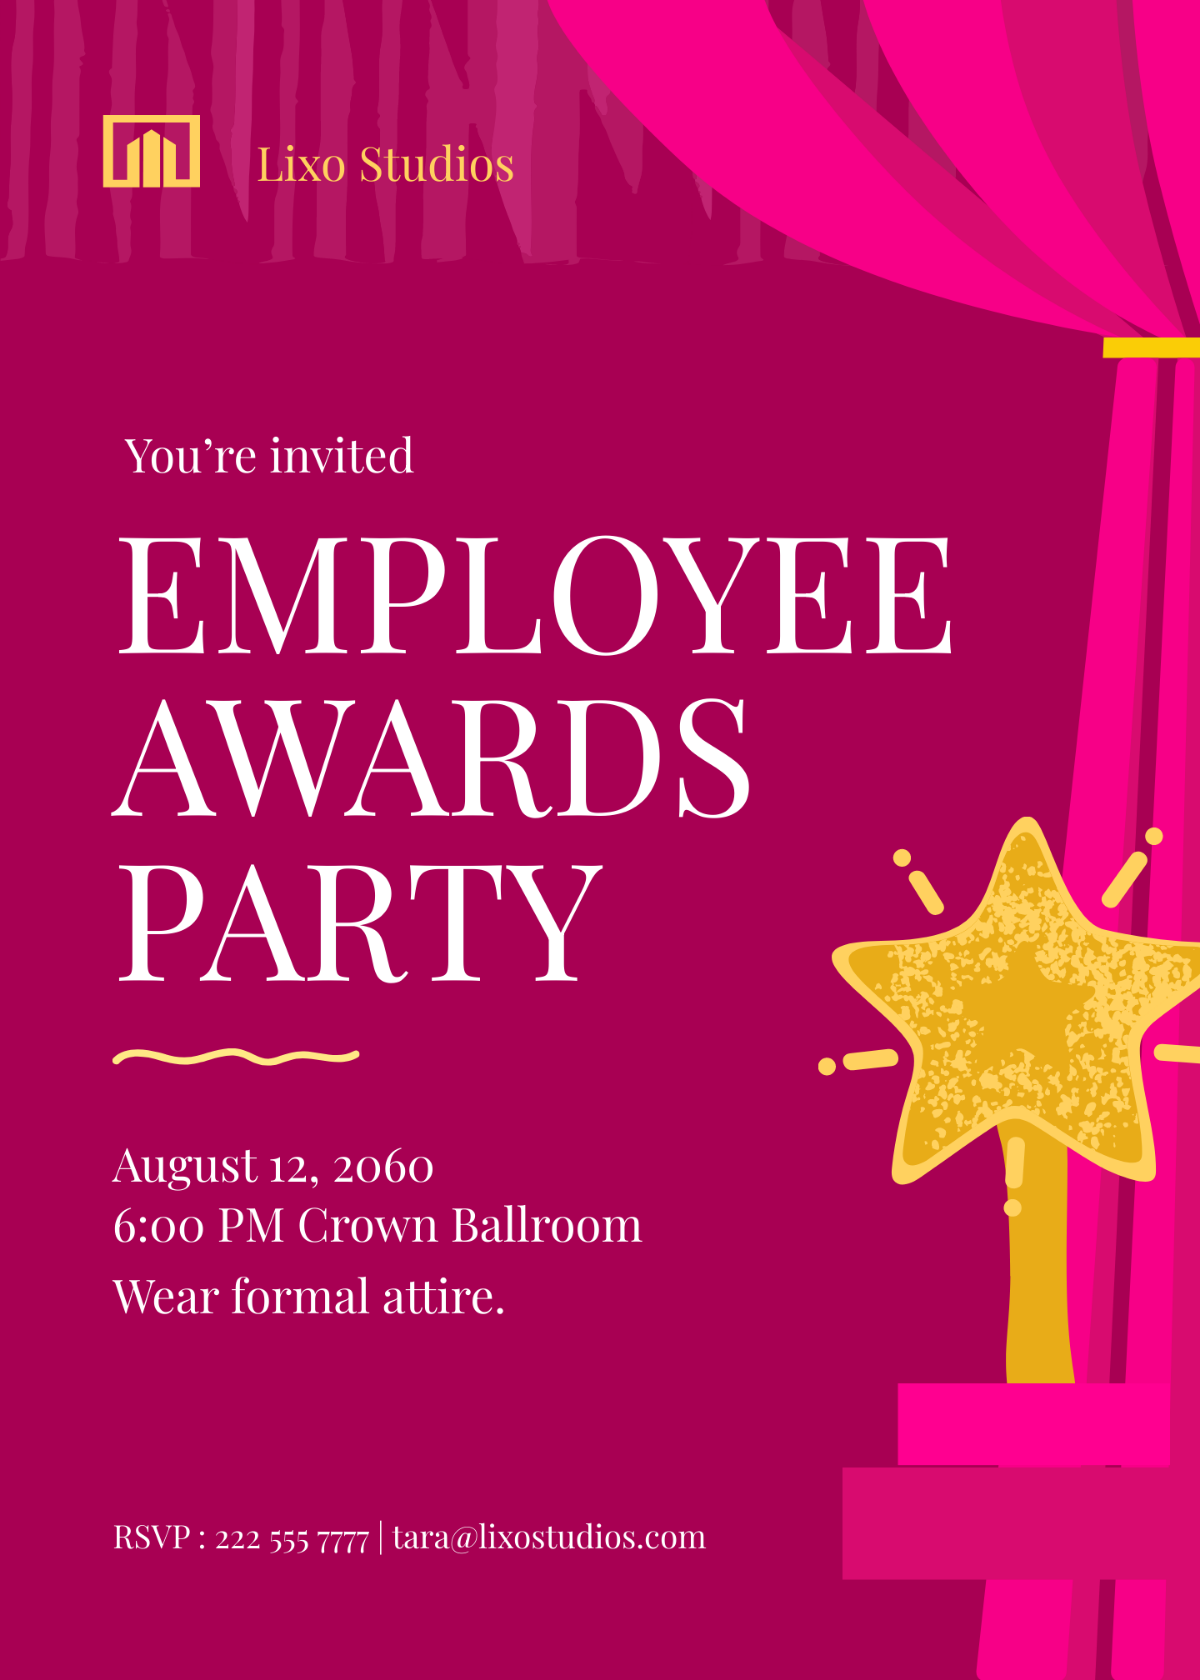 Awards Party Invitation Template